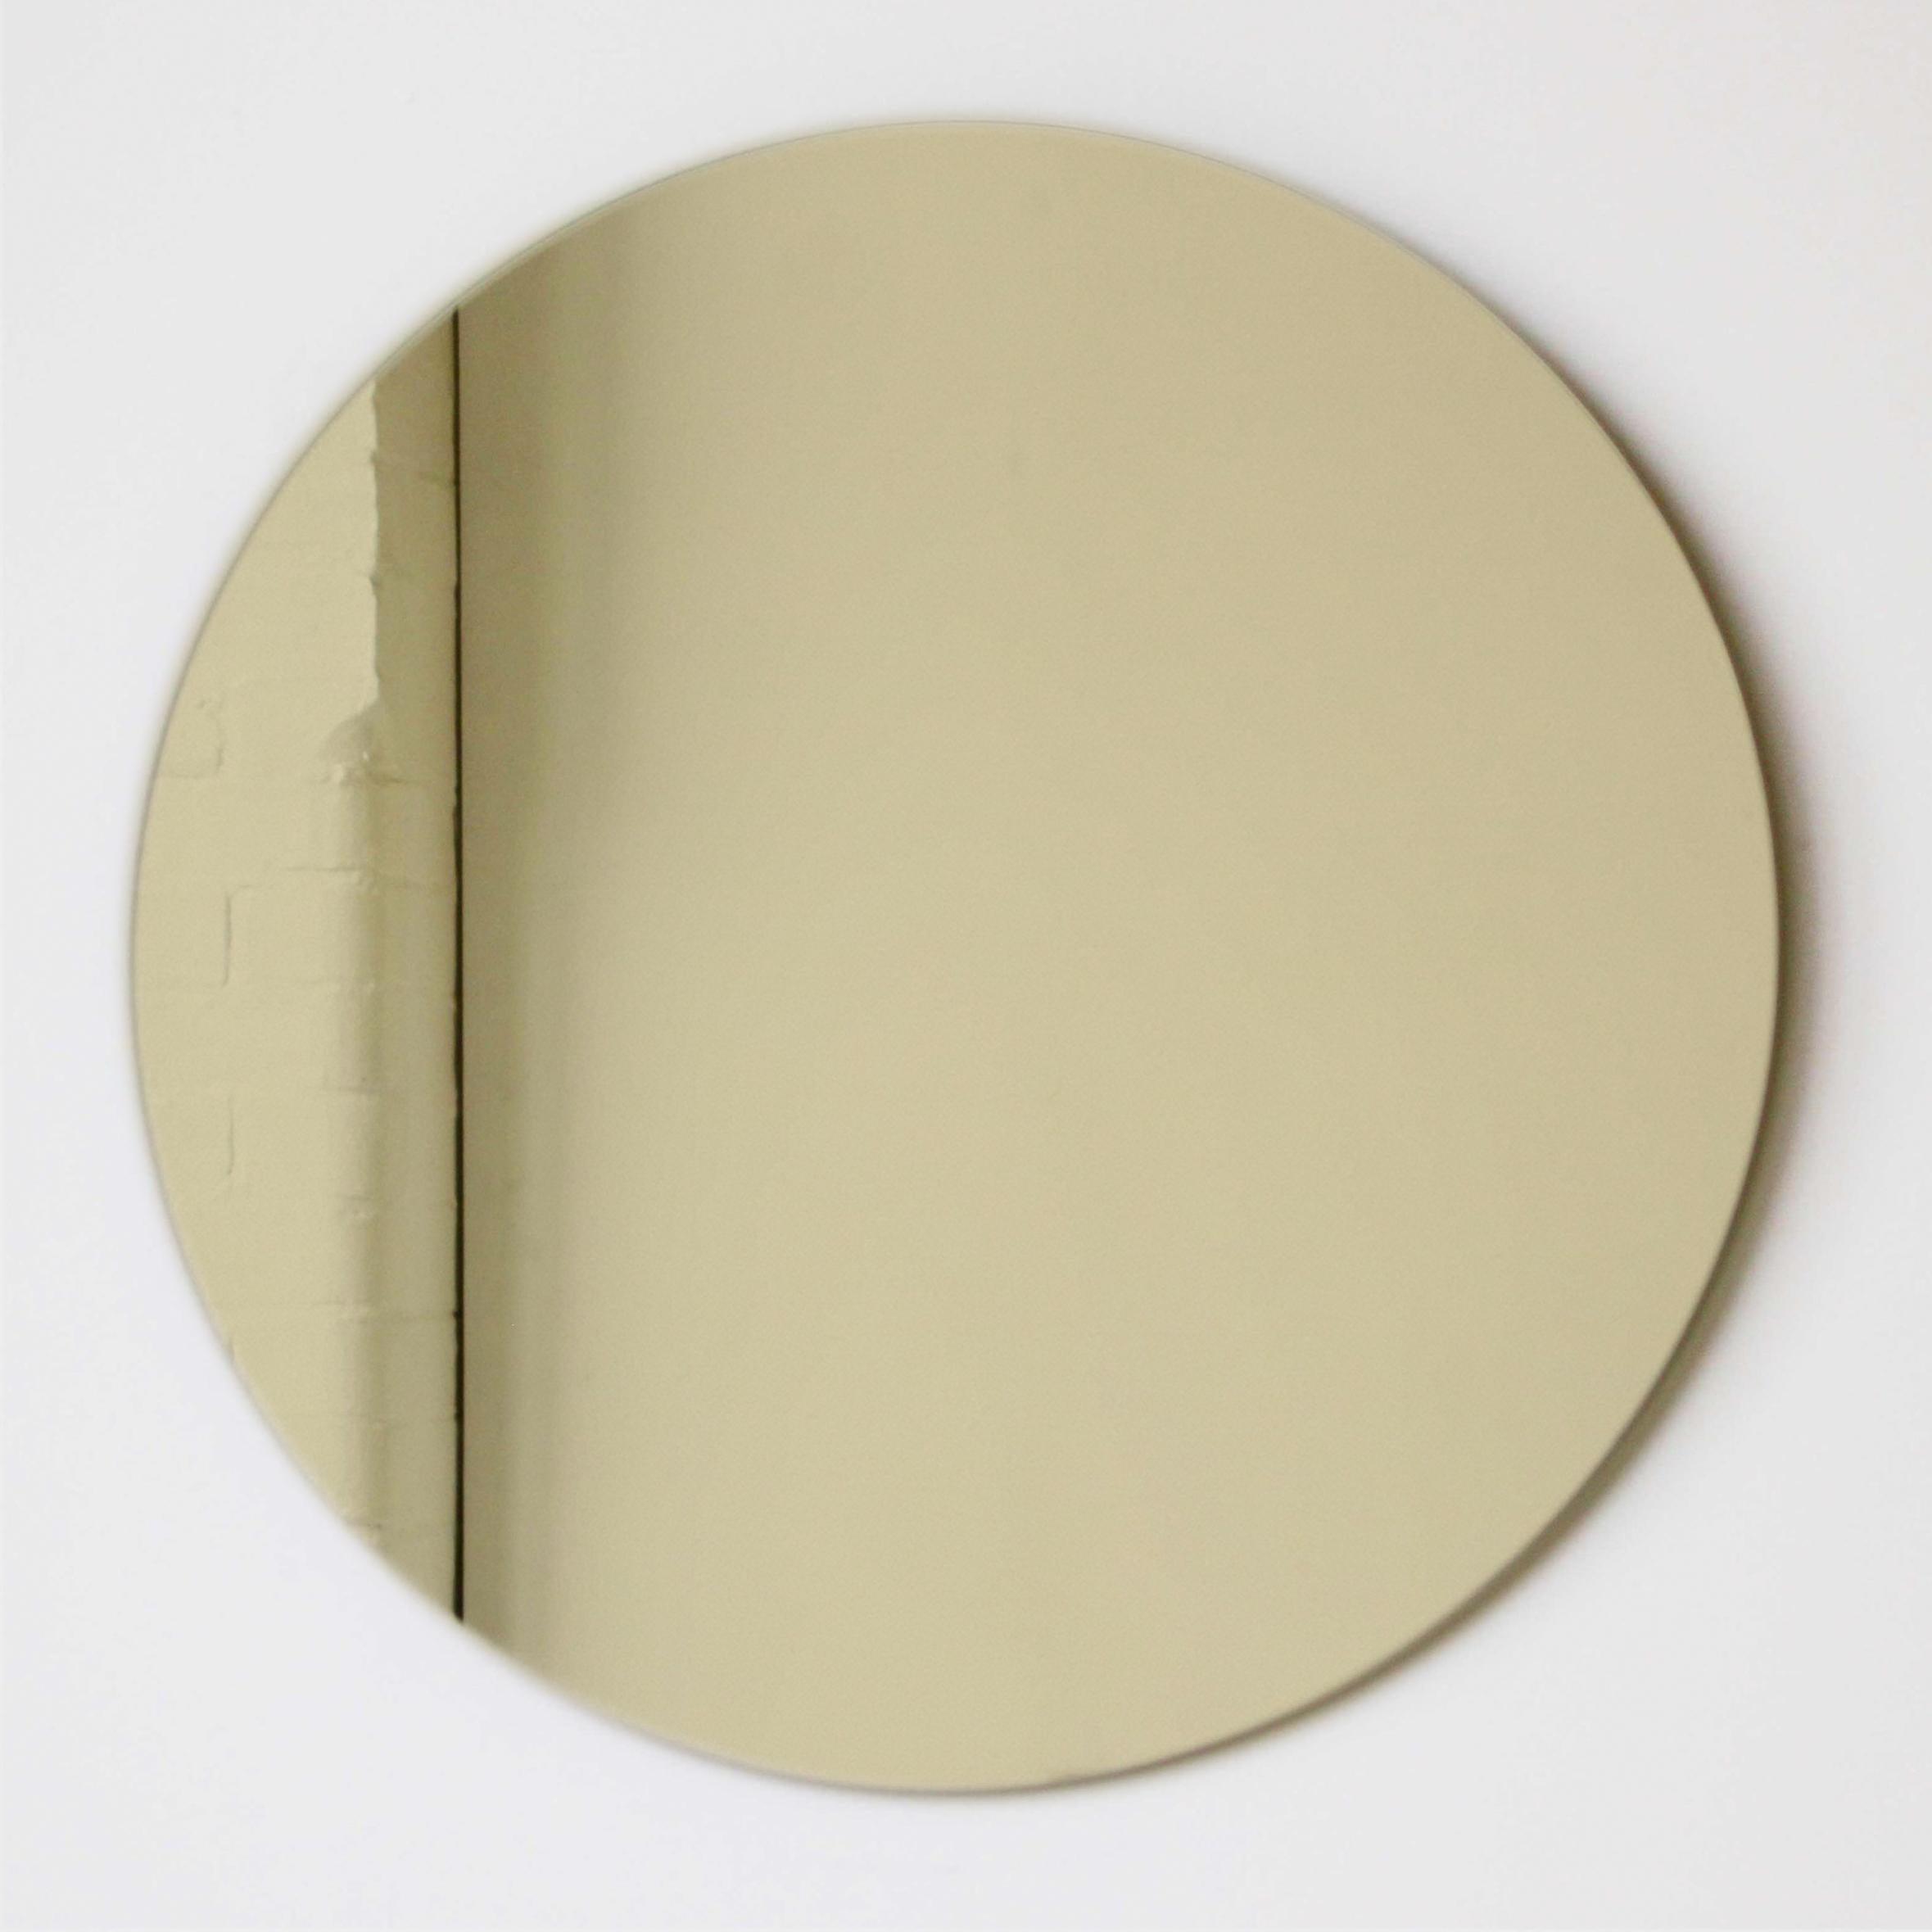 Minimalist Orbis™ round frameless gold tinted mirror with a floating effect. Quality design that ensures the mirror sits perfectly parallel to the wall. Designed and made in London, UK.

Fitted with professional plates not visible once installed for